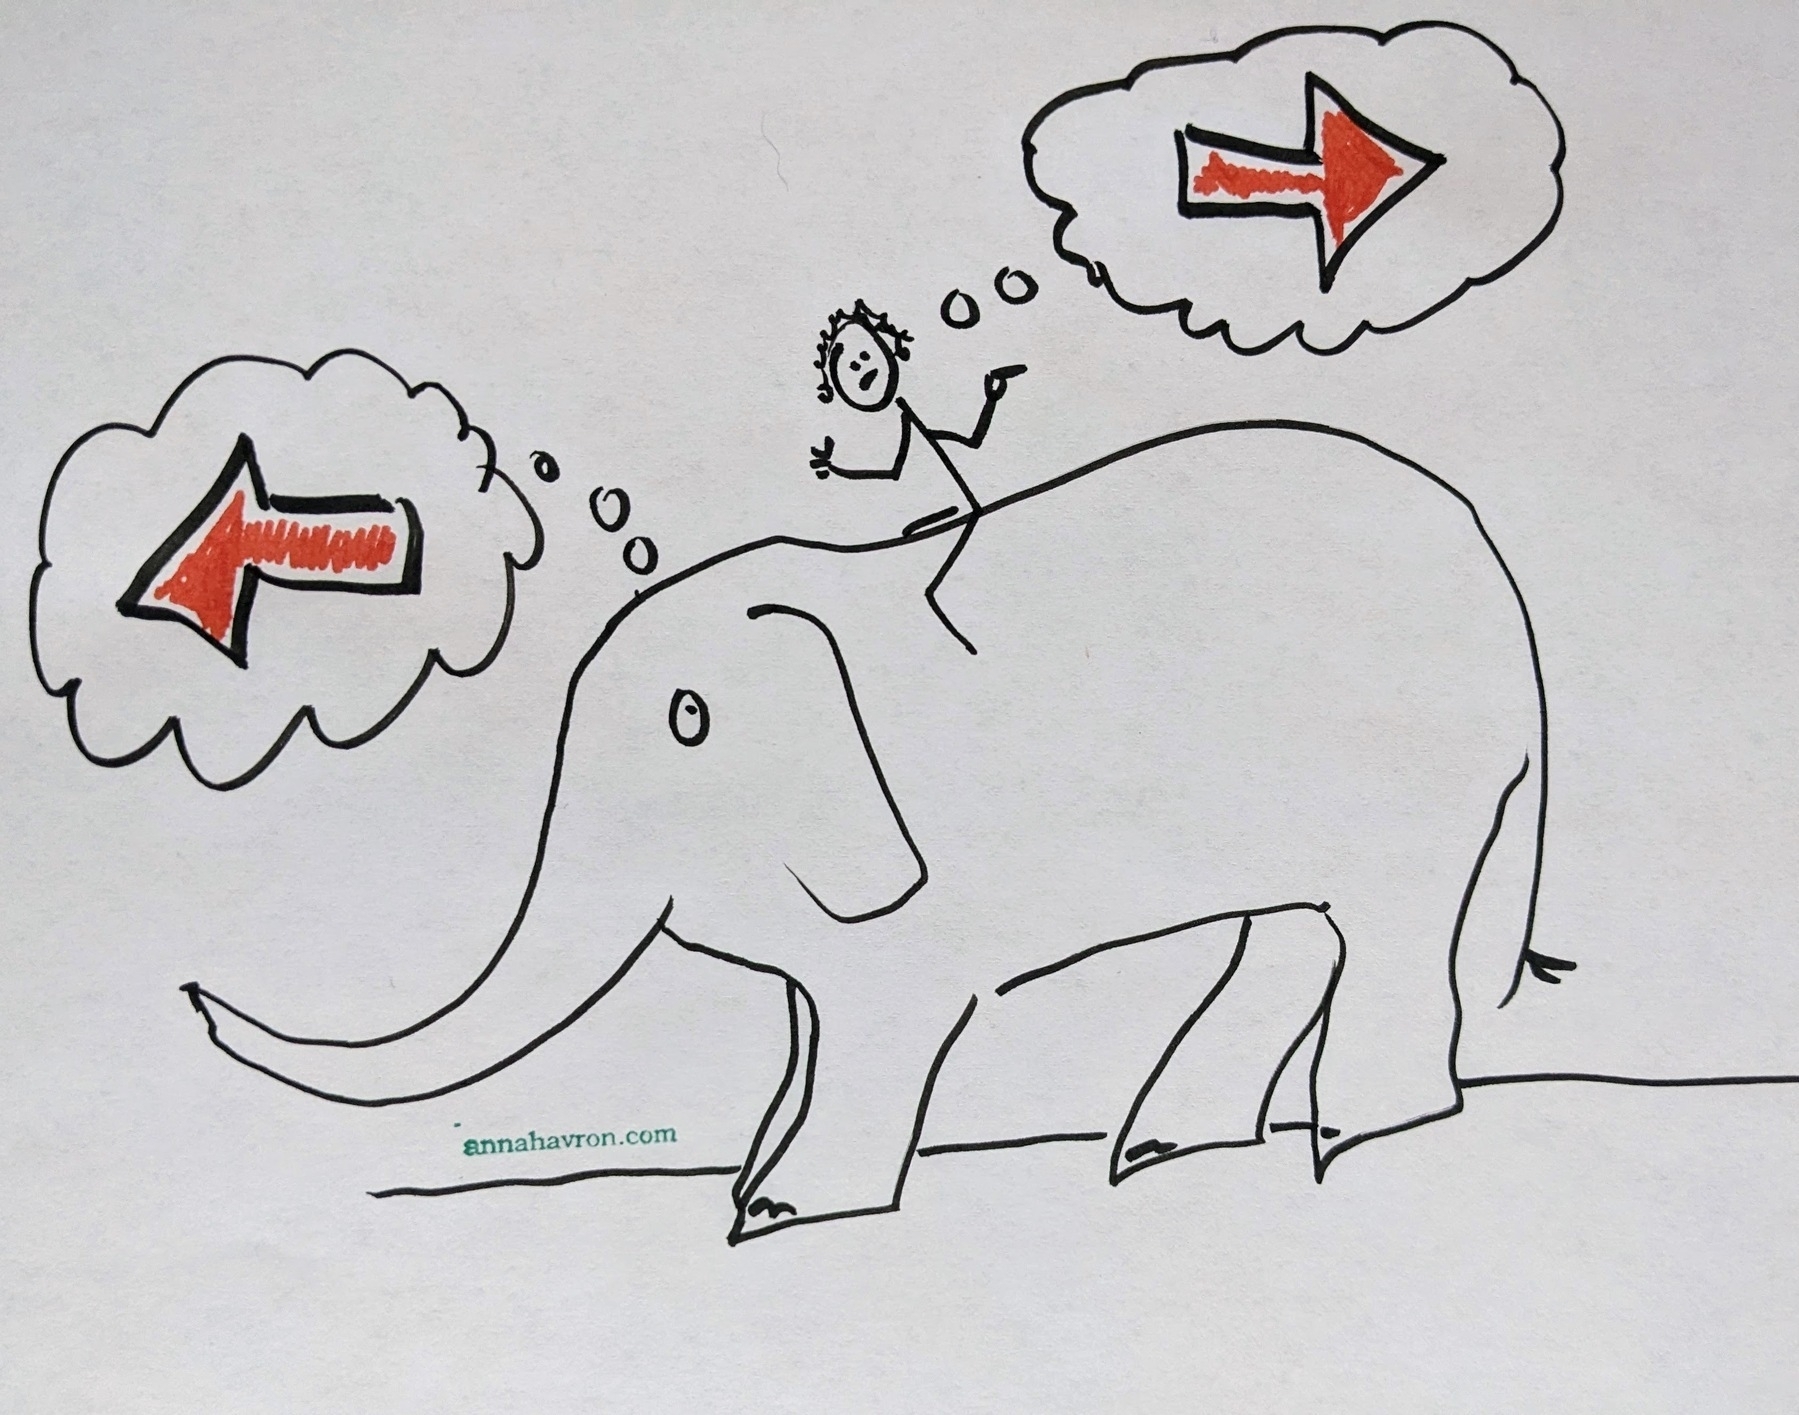 drawing of a rider on an elephant. The rider is pointing backwards, but the elephant is moving forwards.